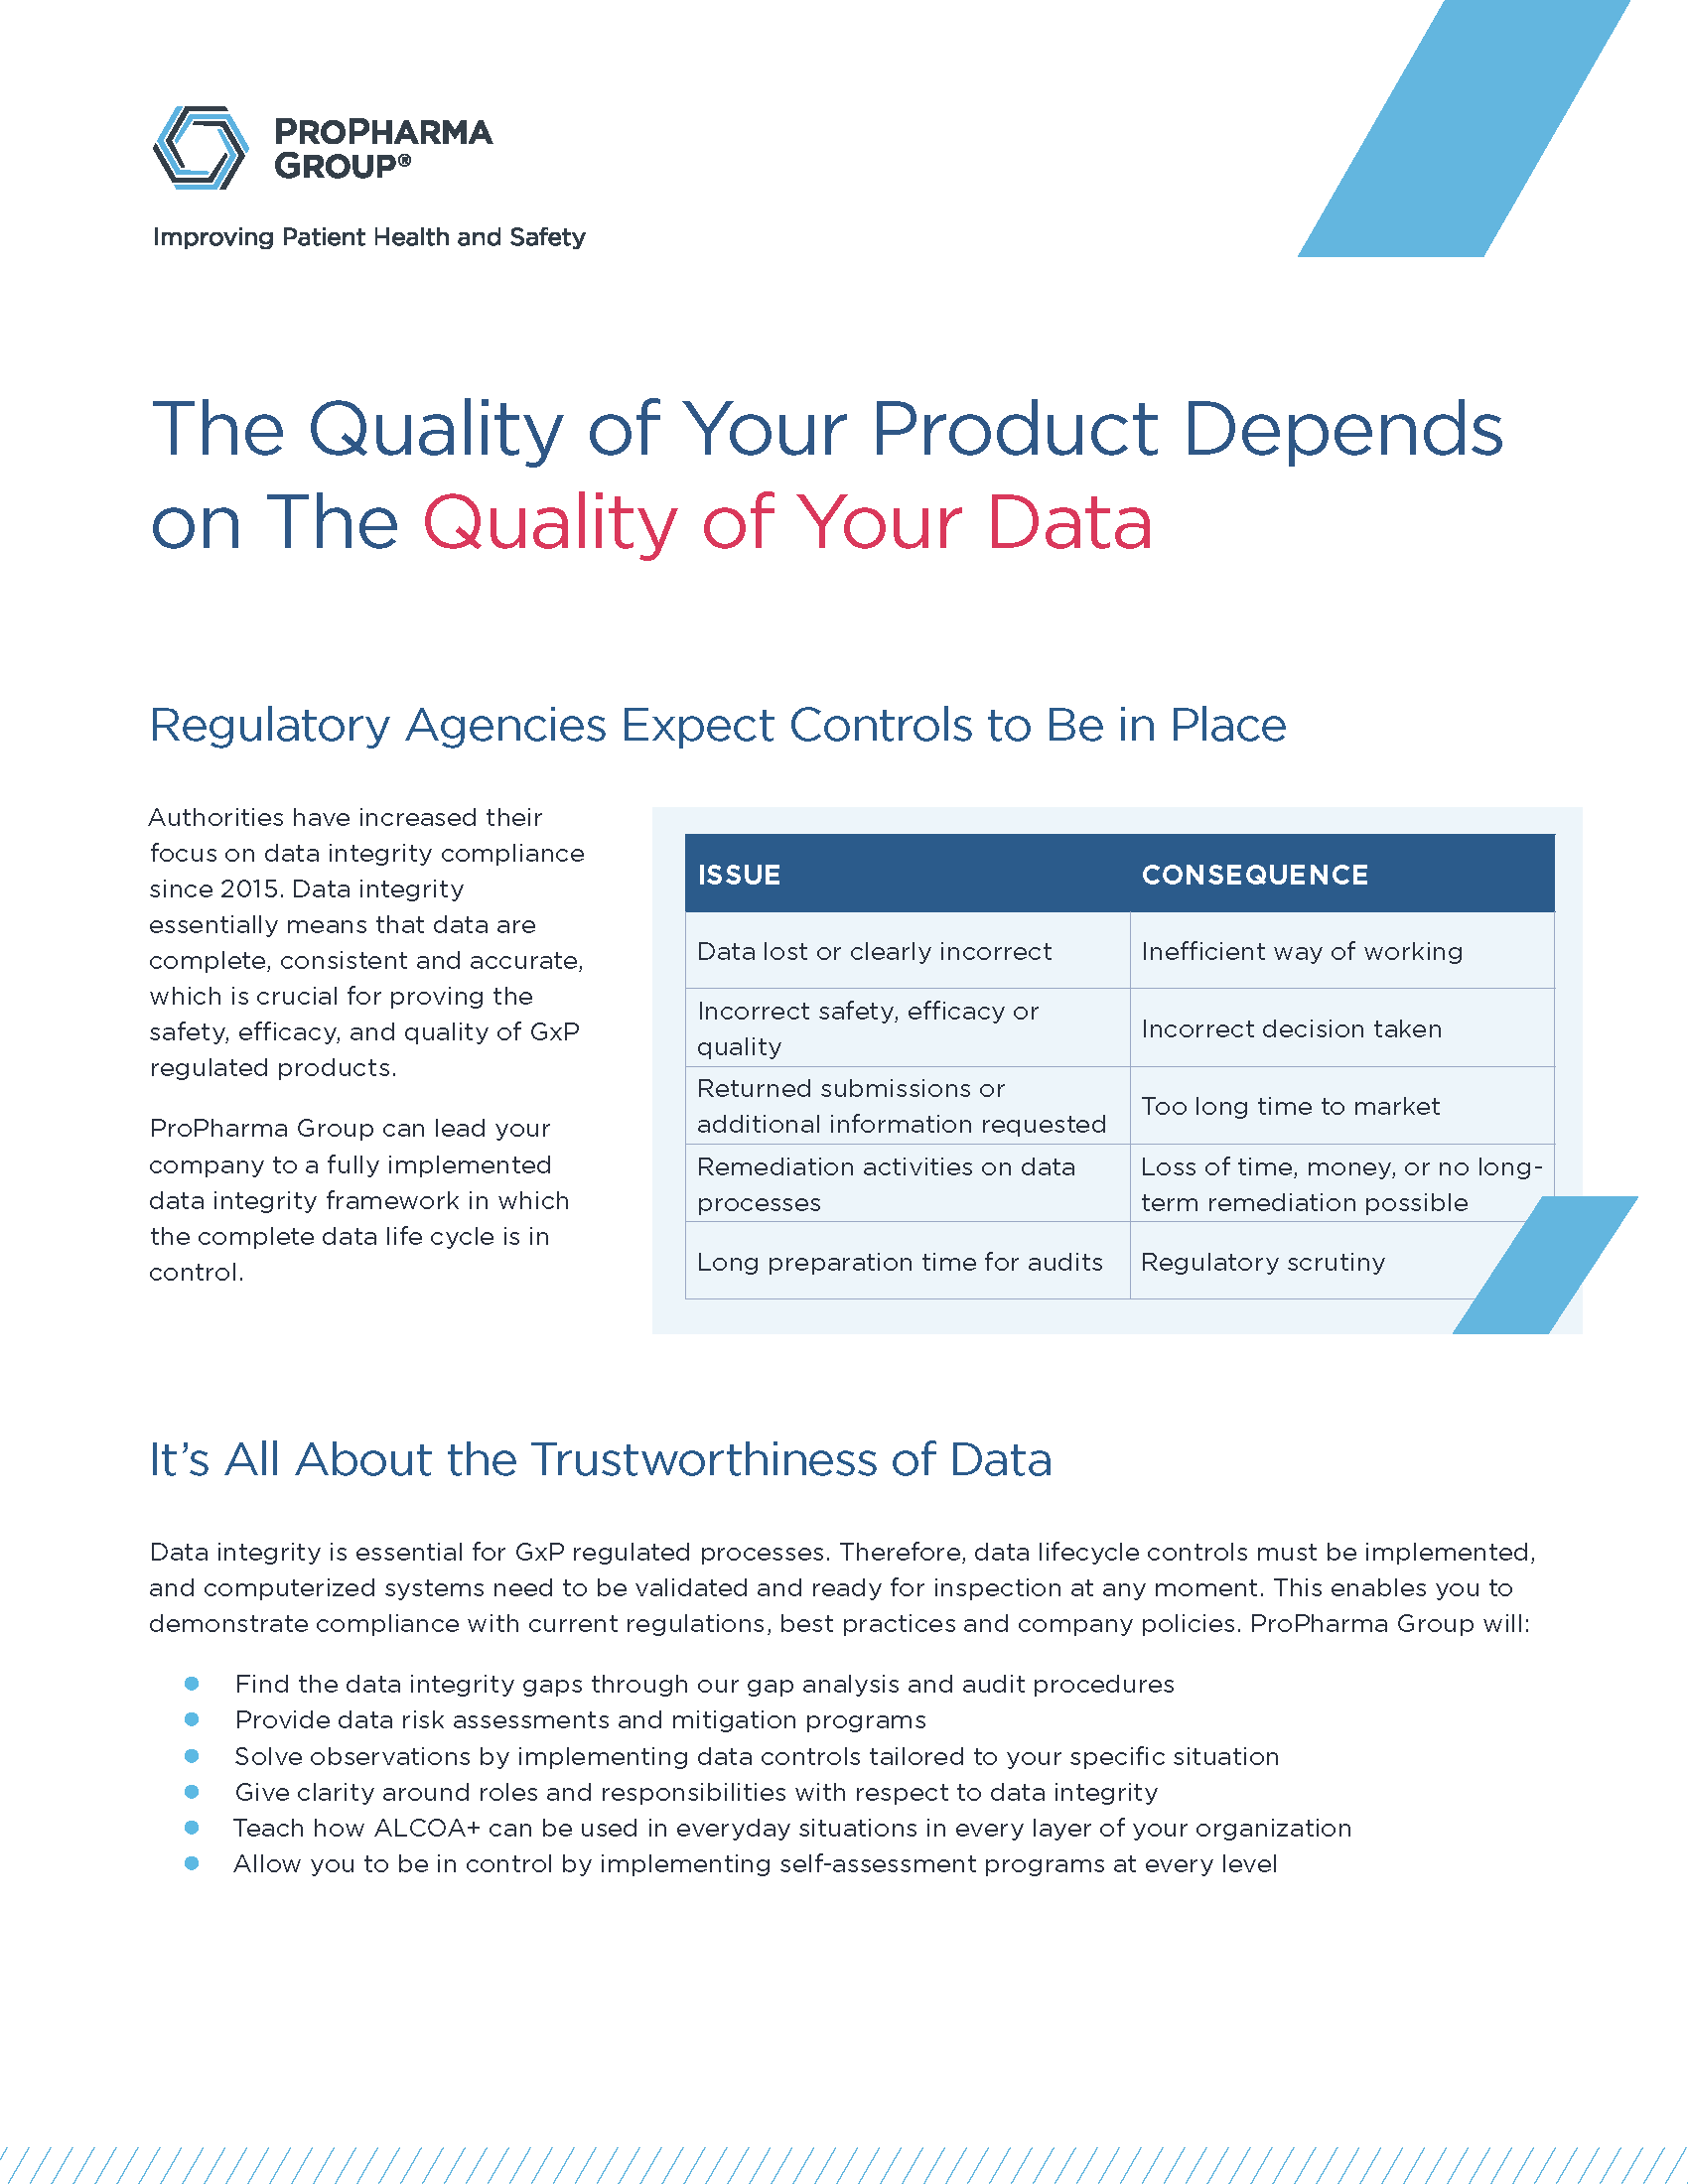 Data Integrity: The Quality of Your Product Depends on The Quality of Your Data